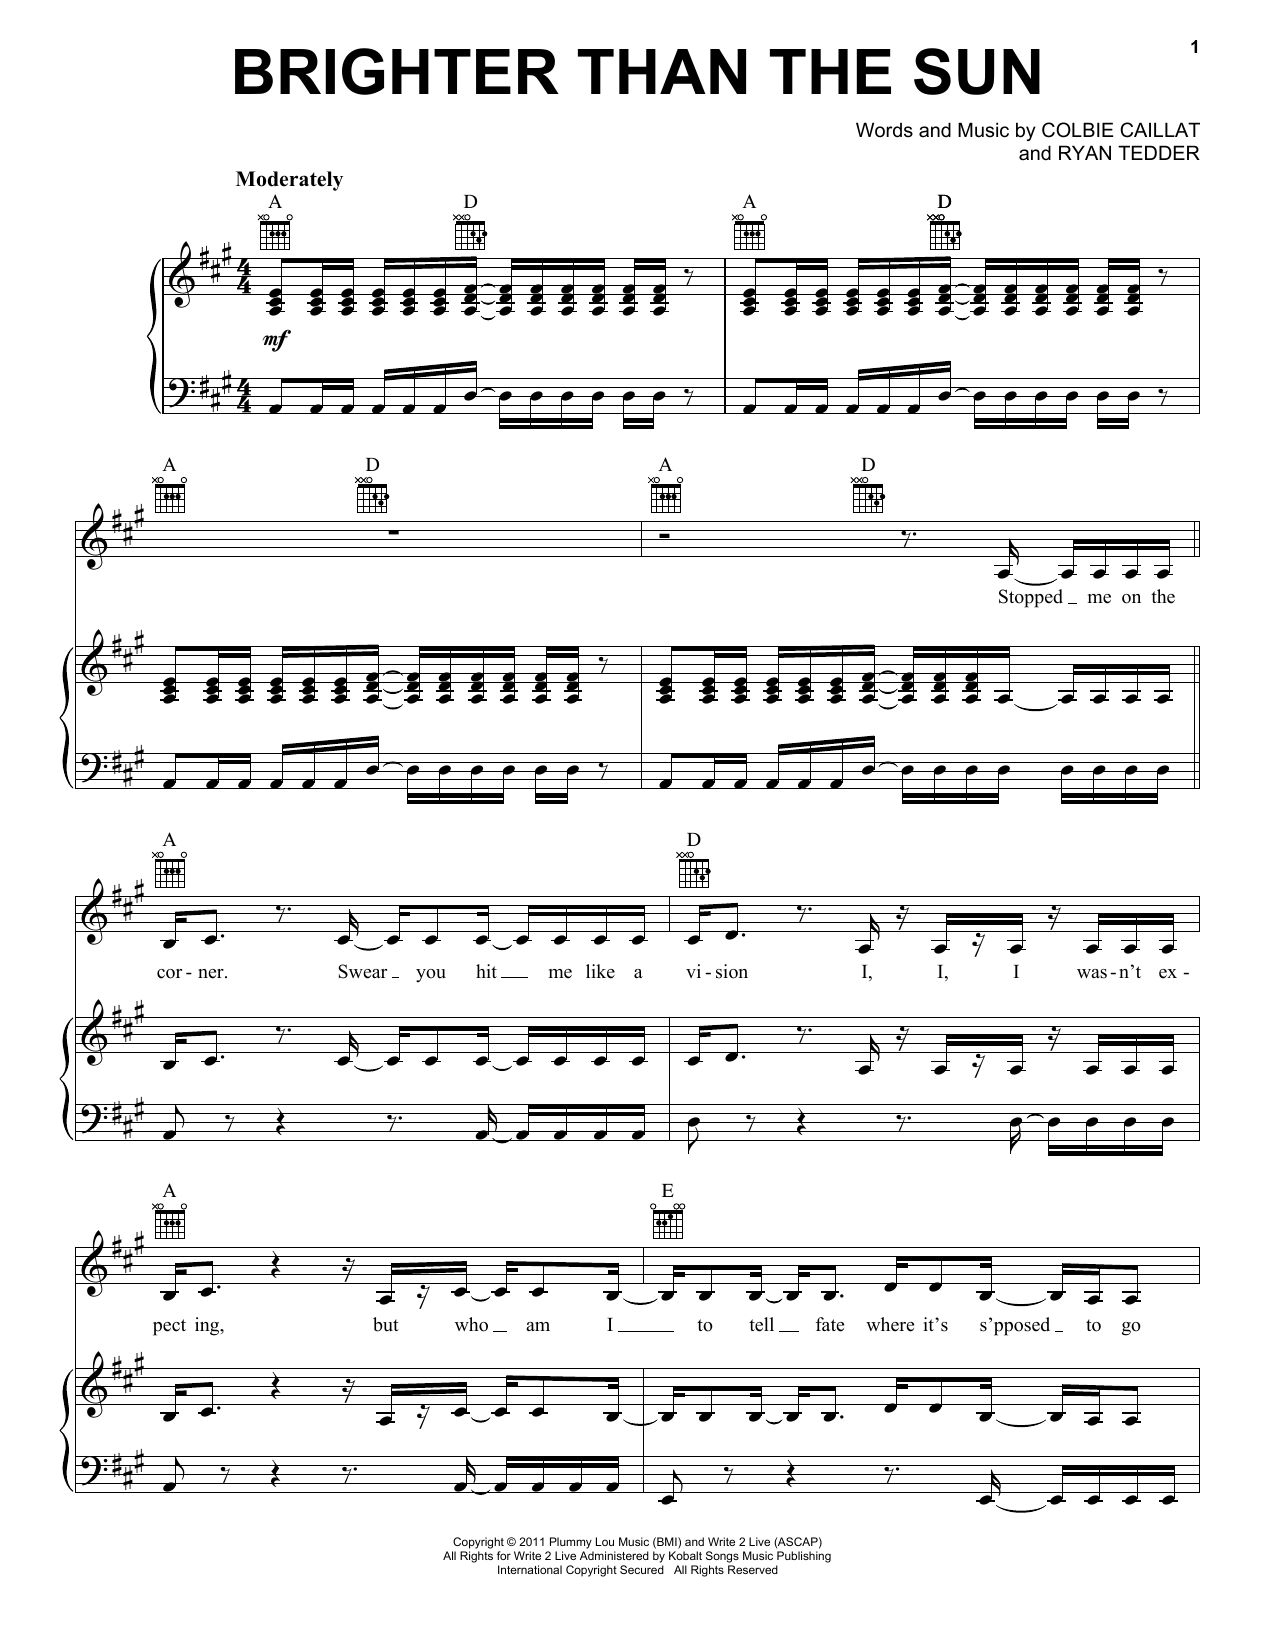 Download Colbie Caillat Brighter Than The Sun Sheet Music